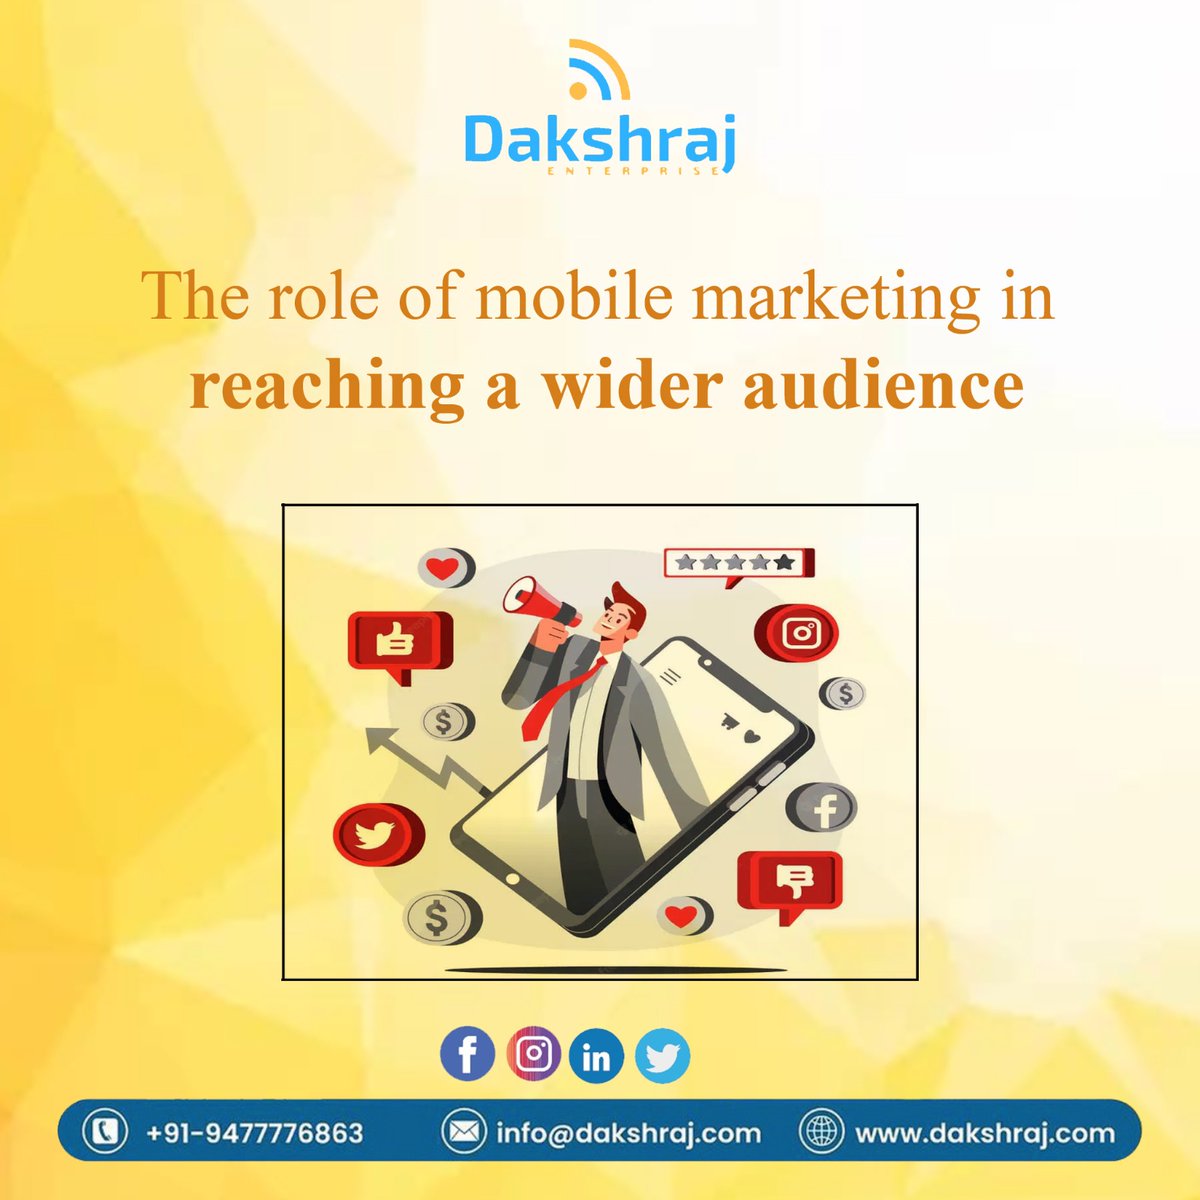 In today's world, your customers are on their phones. Connect with them through mobile marketing! 🌎📲

dakshraj.com/services/mobil…

#digitalmarketing #mobilemarketing #growyourbusiness #reachyouraudience